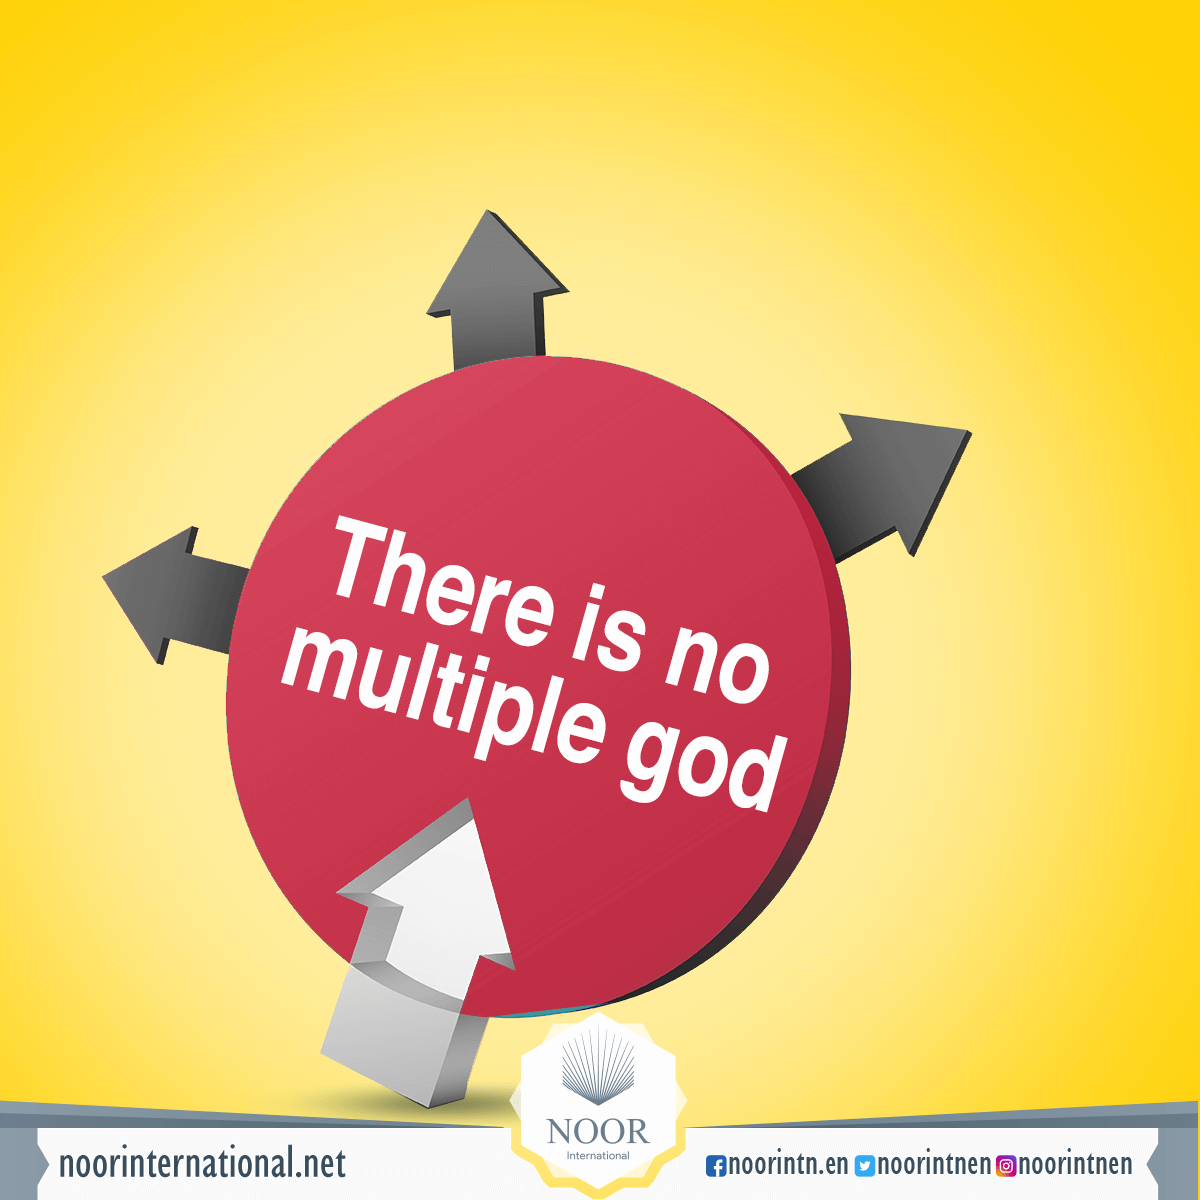 There is no multiple god